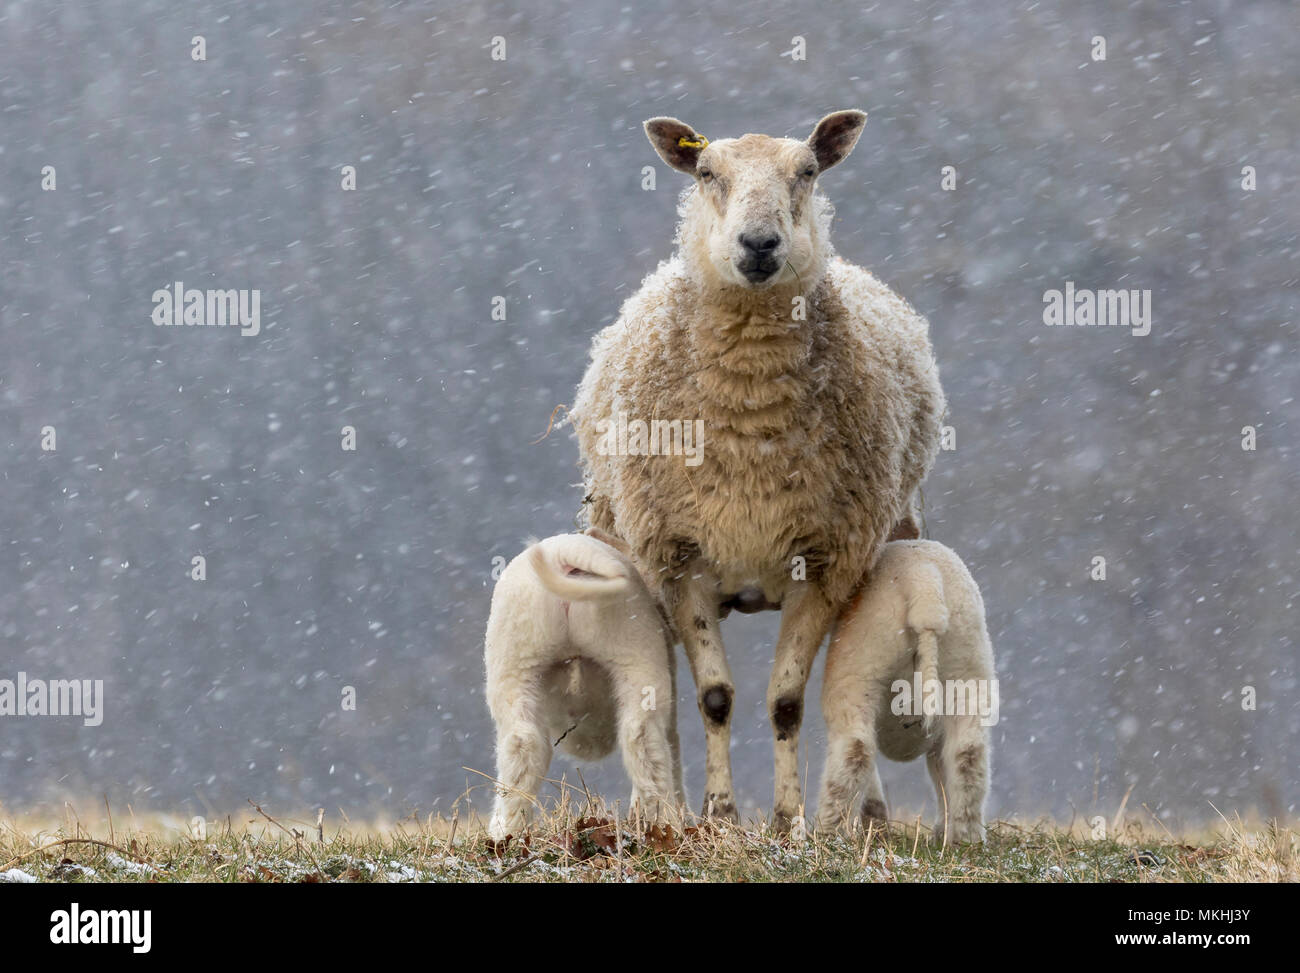 Sheep ( Ovis aries) standing in falling snow, England Stock Photo